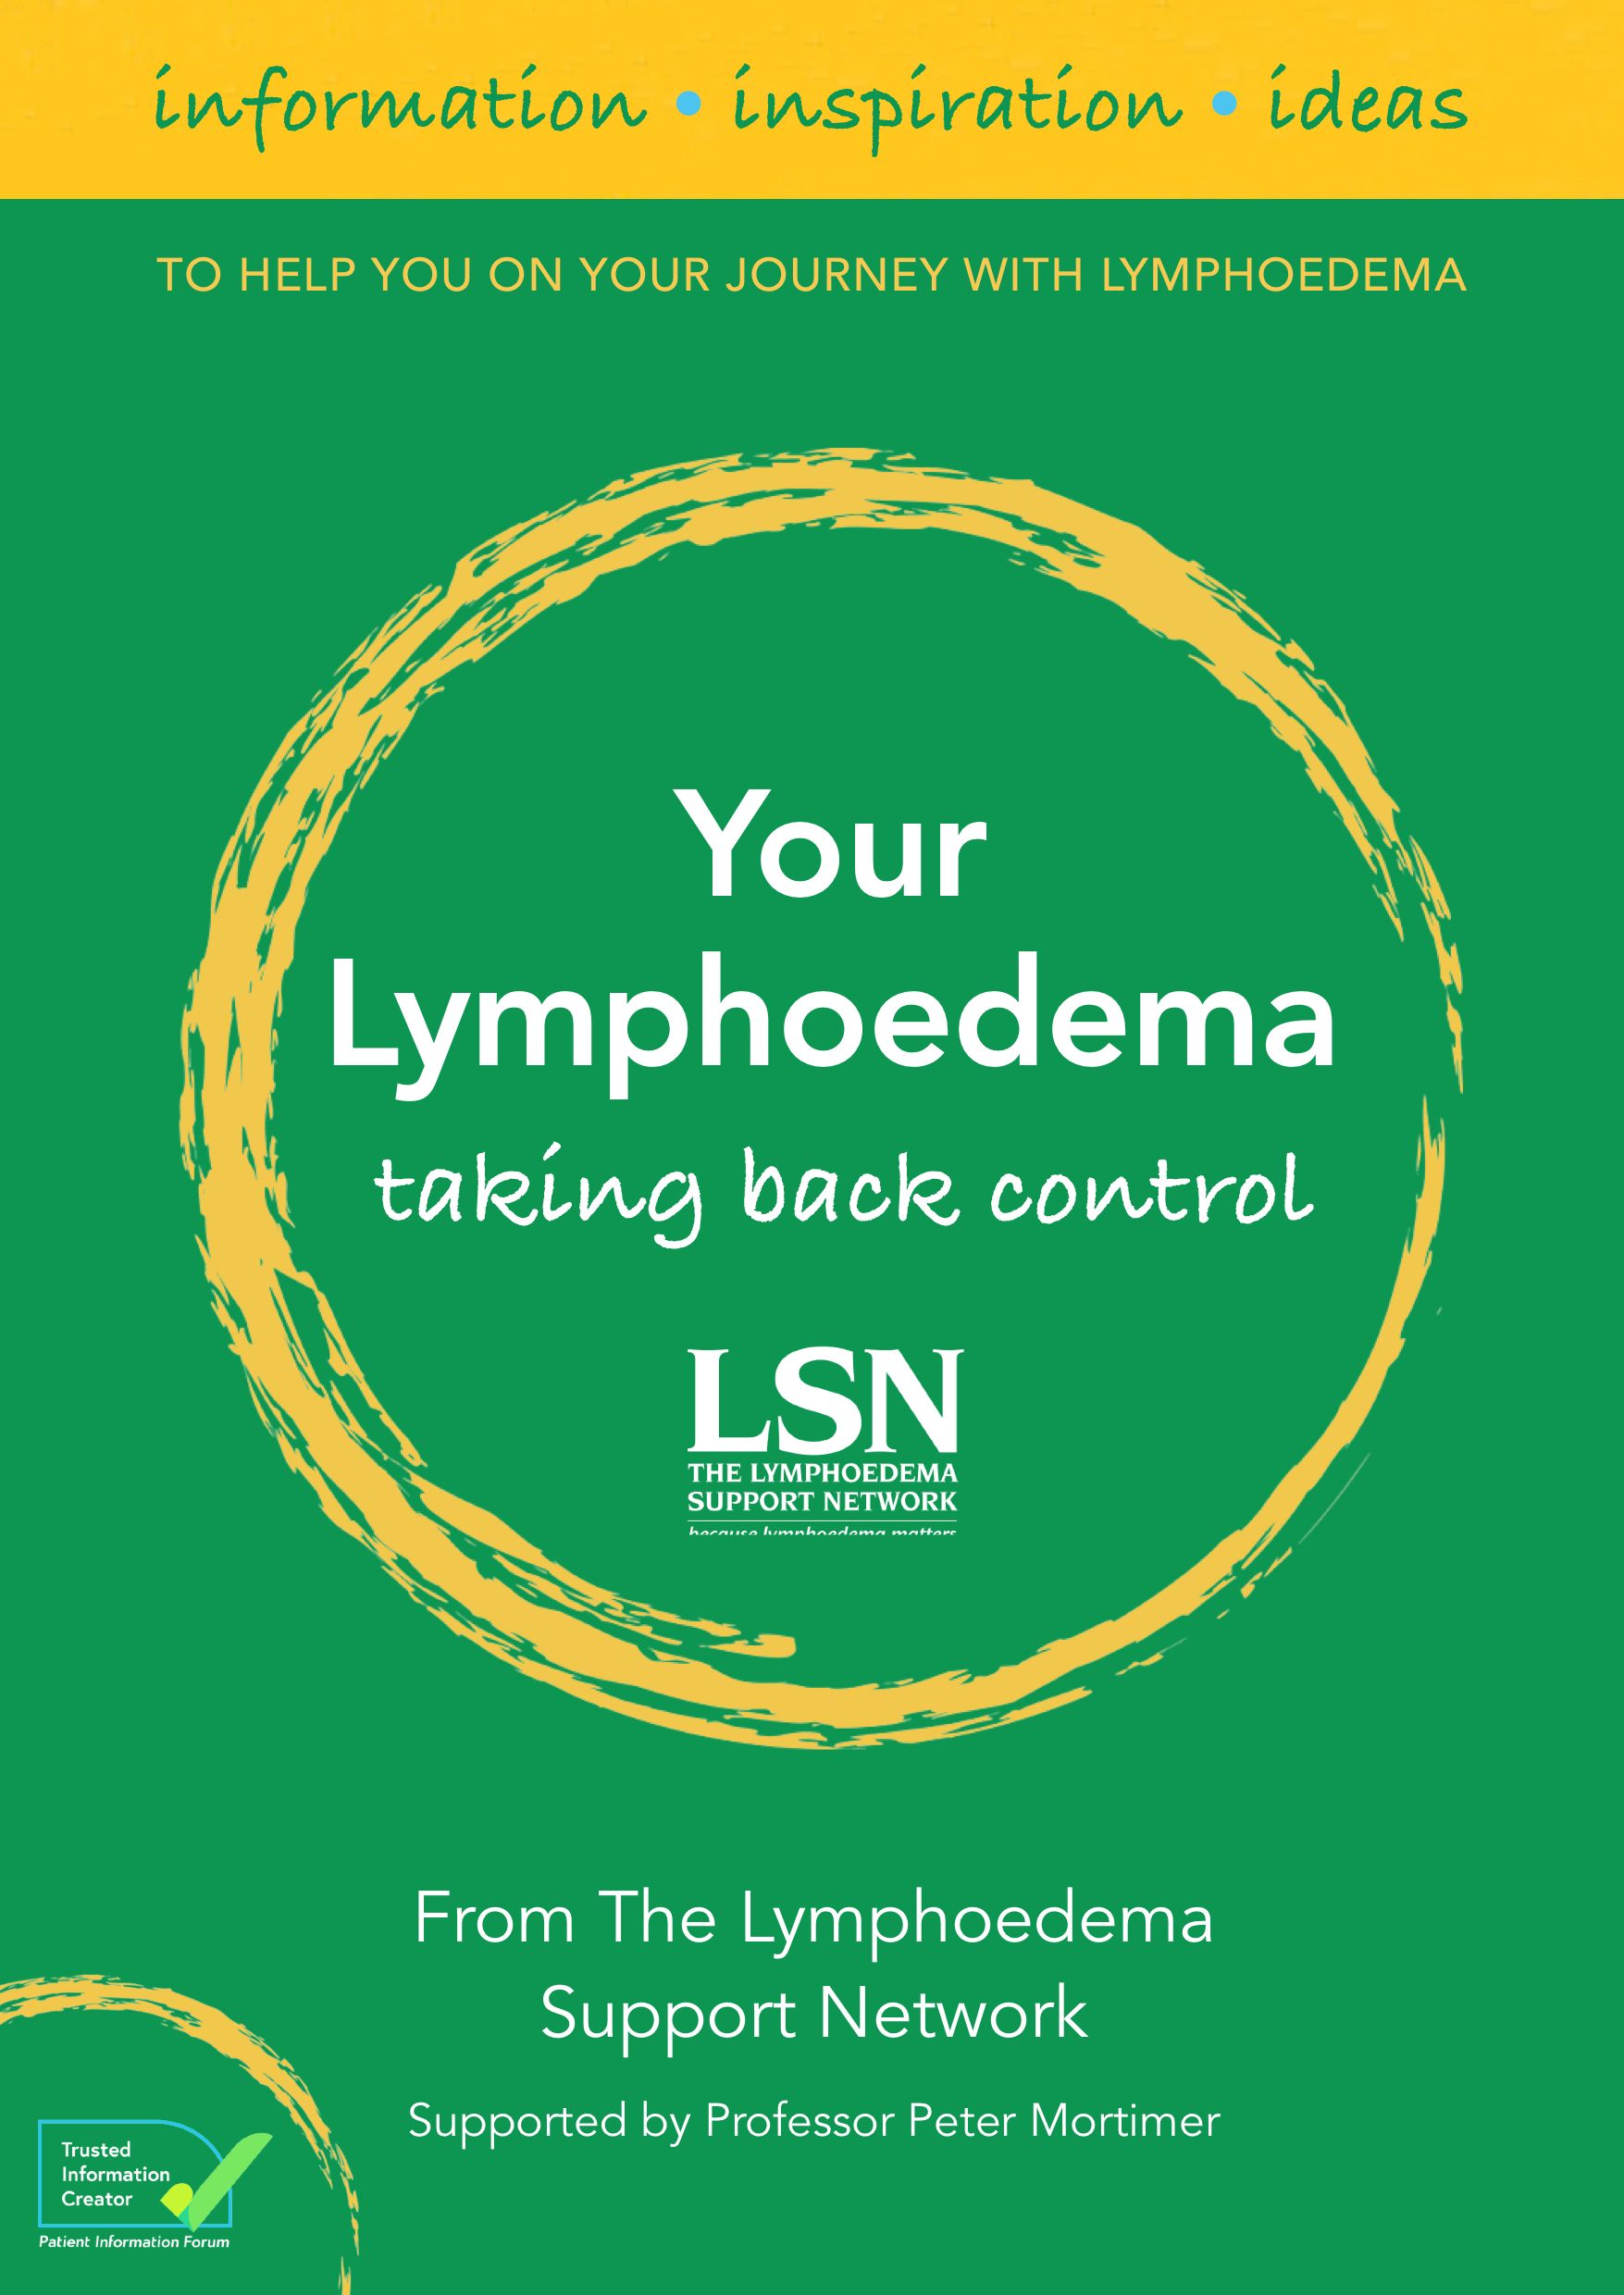 The Lymphoedema Support Network’s new book is now available...